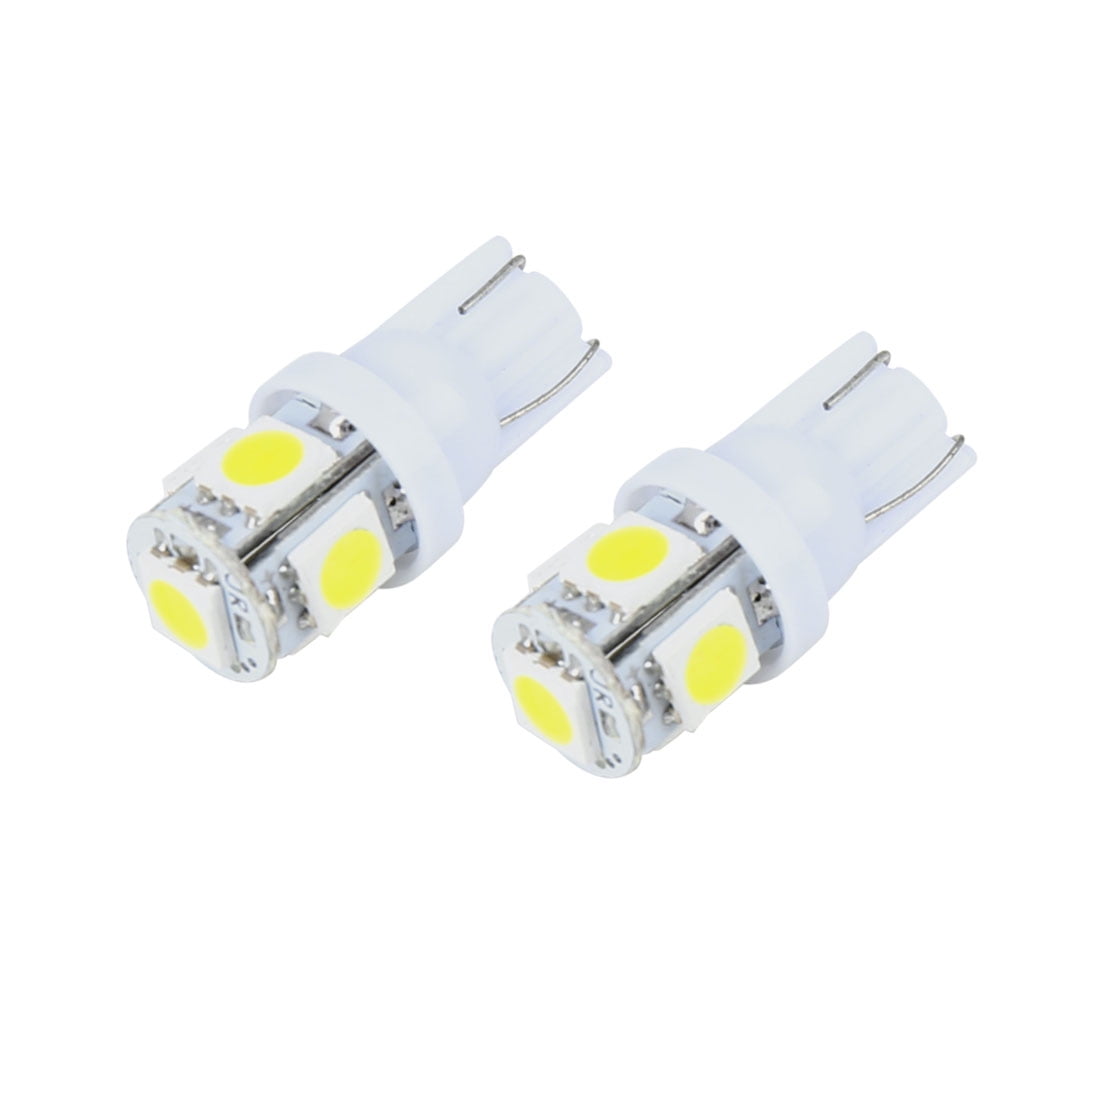 TWO HID WHITE 4-SMD LED License Plate Lights Bulbs #46F